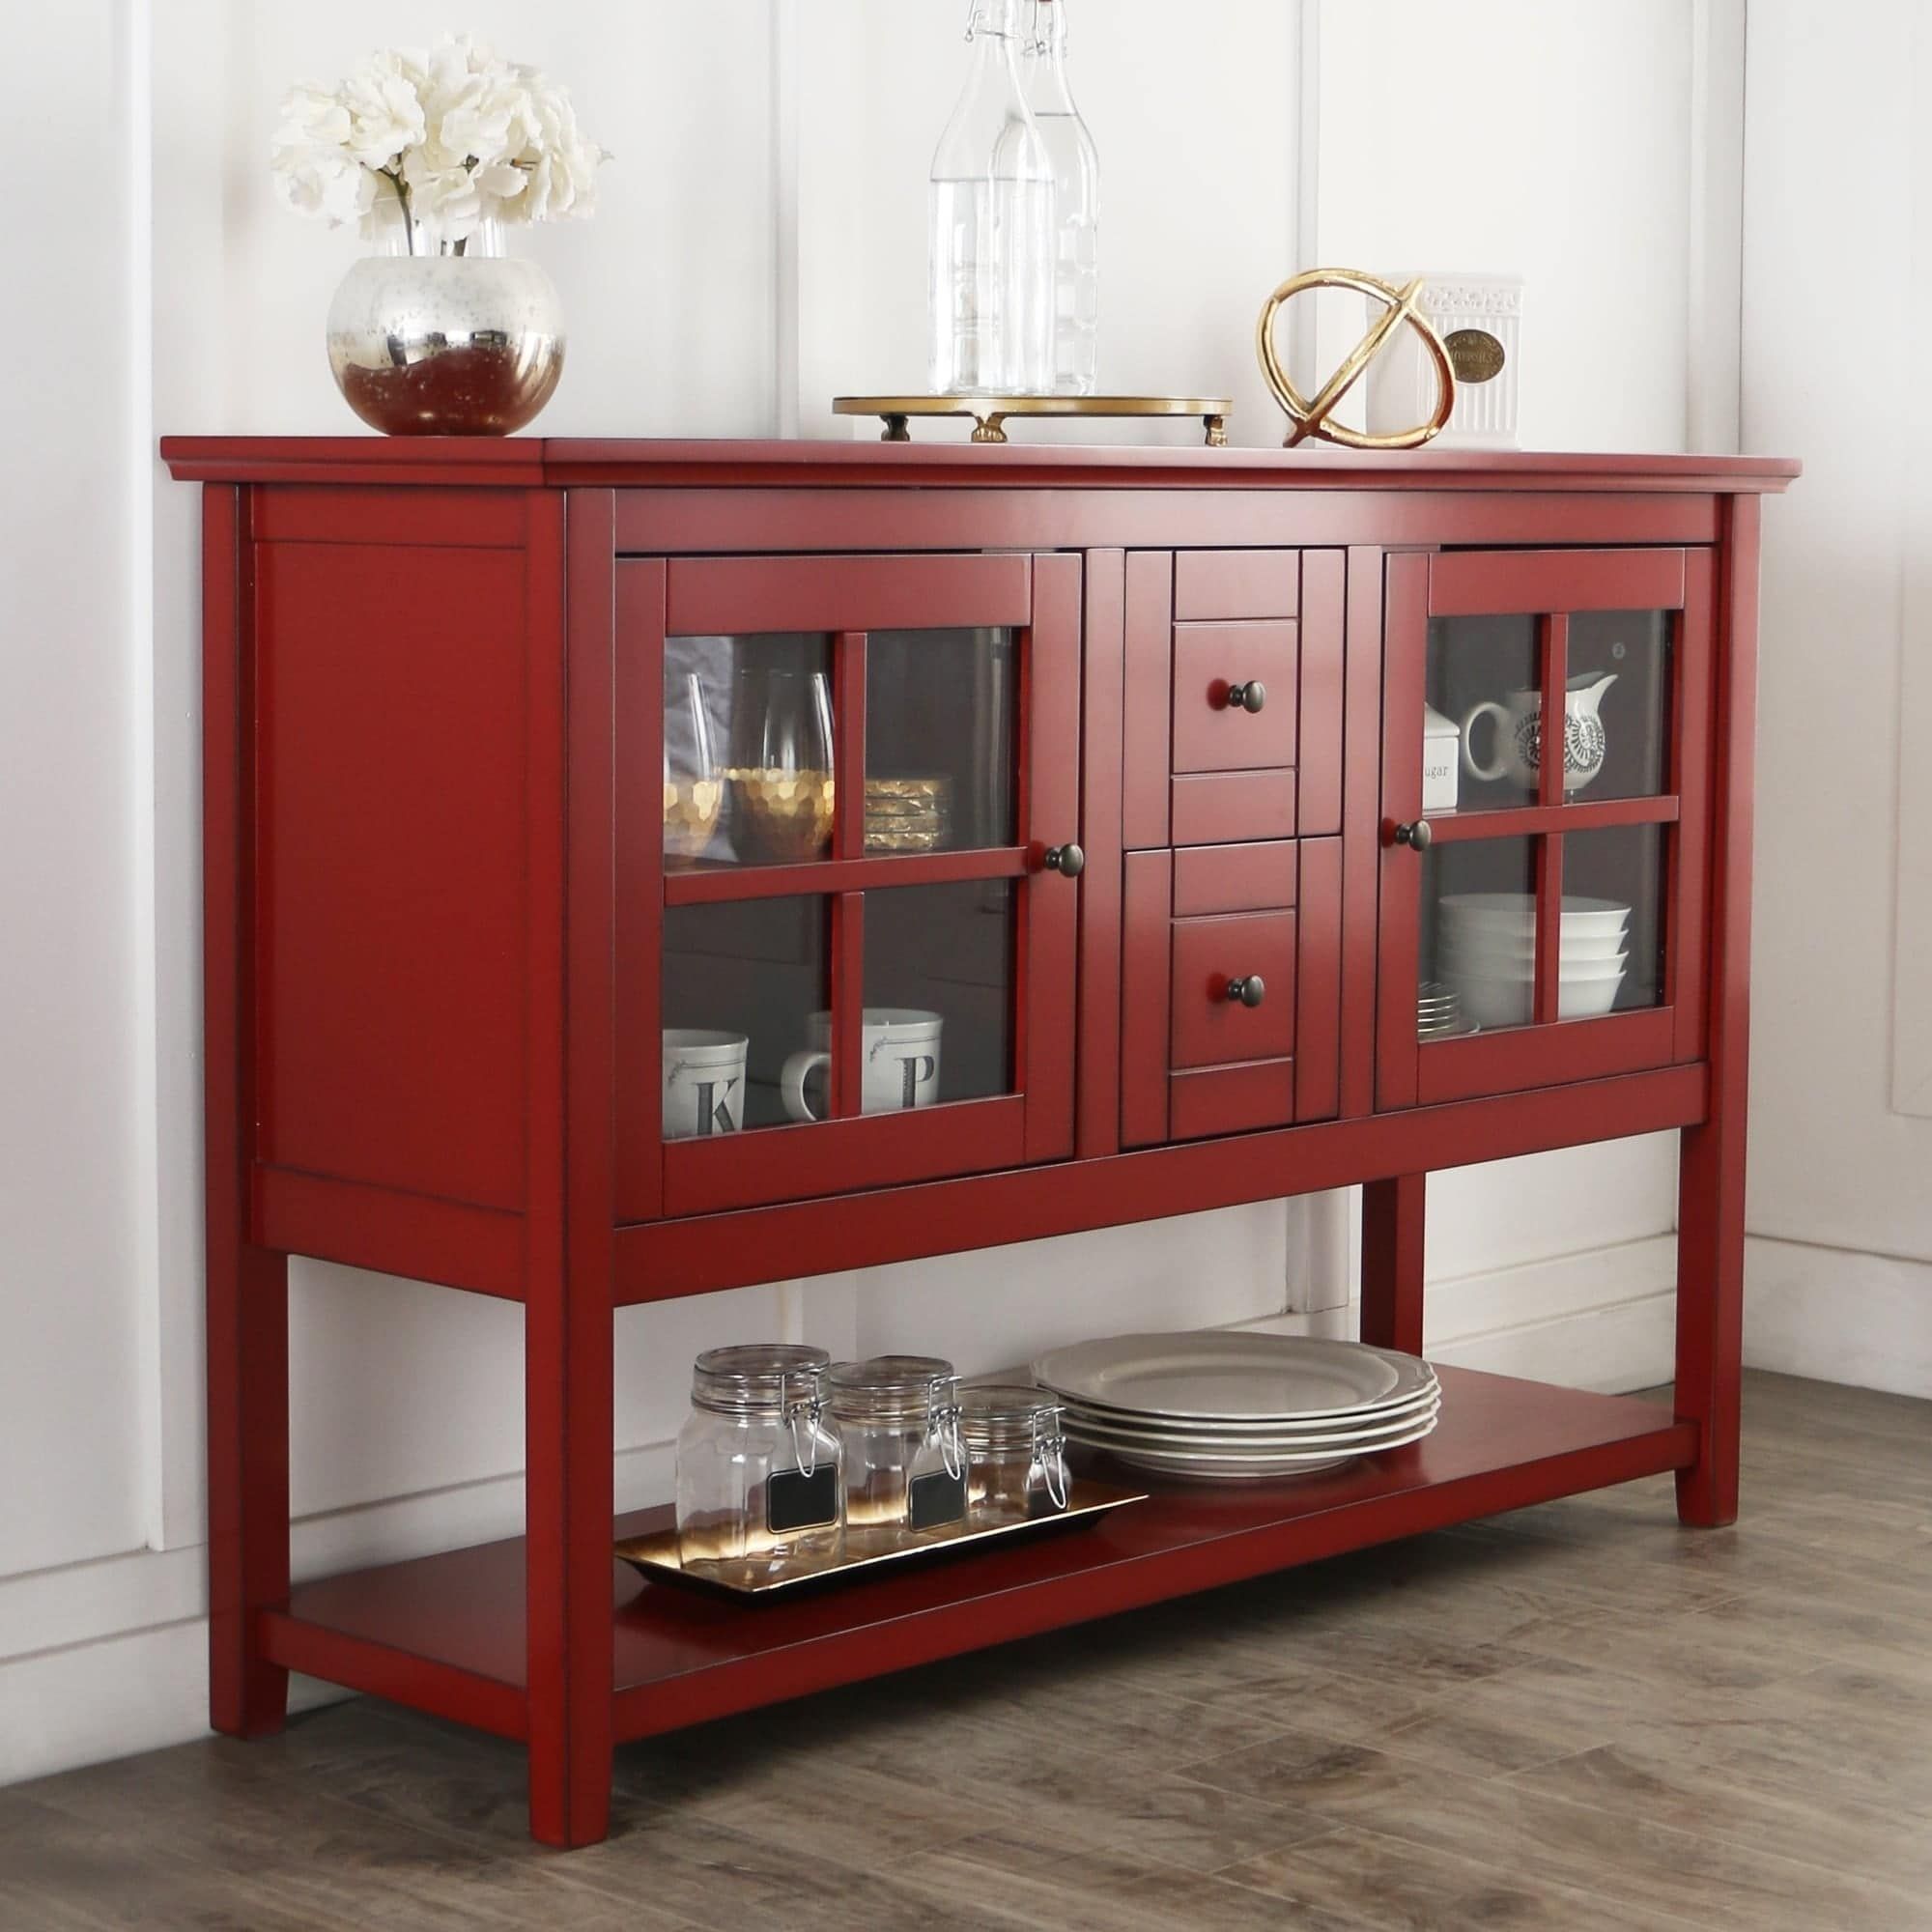 52" Buffet Tv Stand In Antique Red In 2019 | Naples Throughout Simple Living Layla Black Buffets (View 23 of 30)